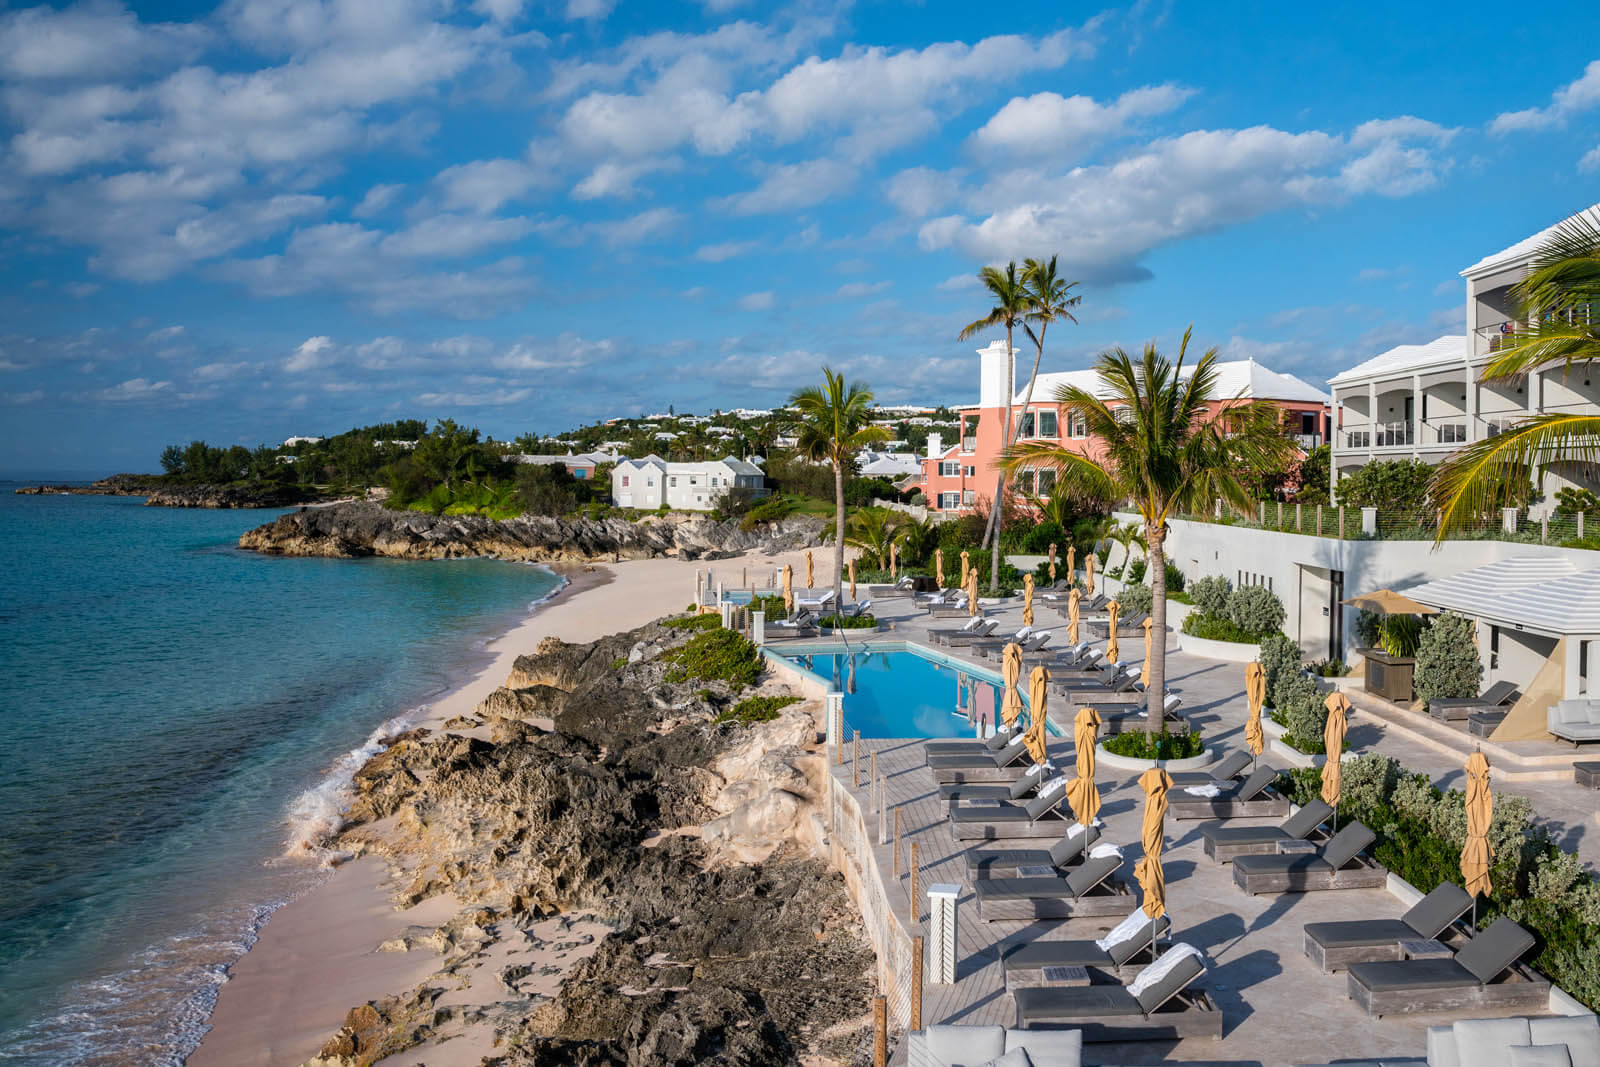 The view of the Loren at Pink Beach where you can dine or have brunch on the outdoor deck in Bermuda